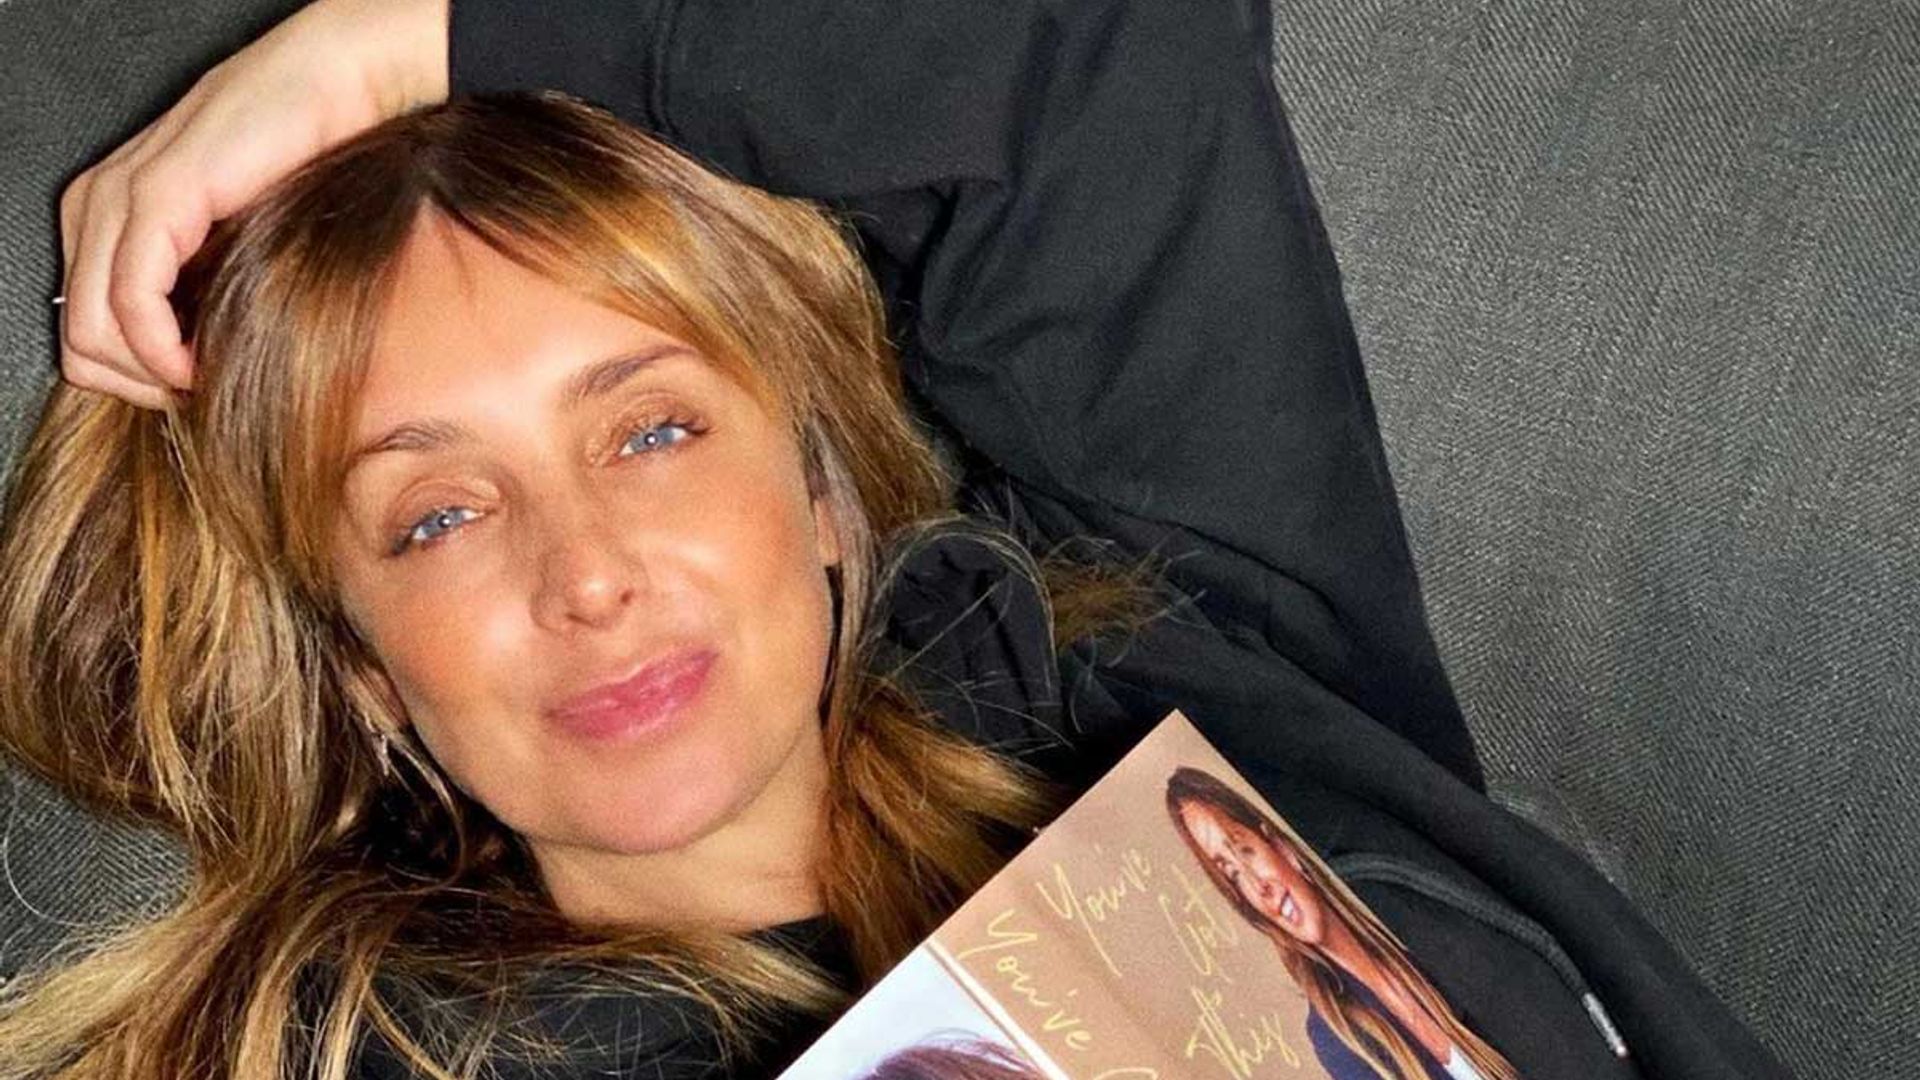 Louise Redknapp just wowed us with this glam loungewear snap